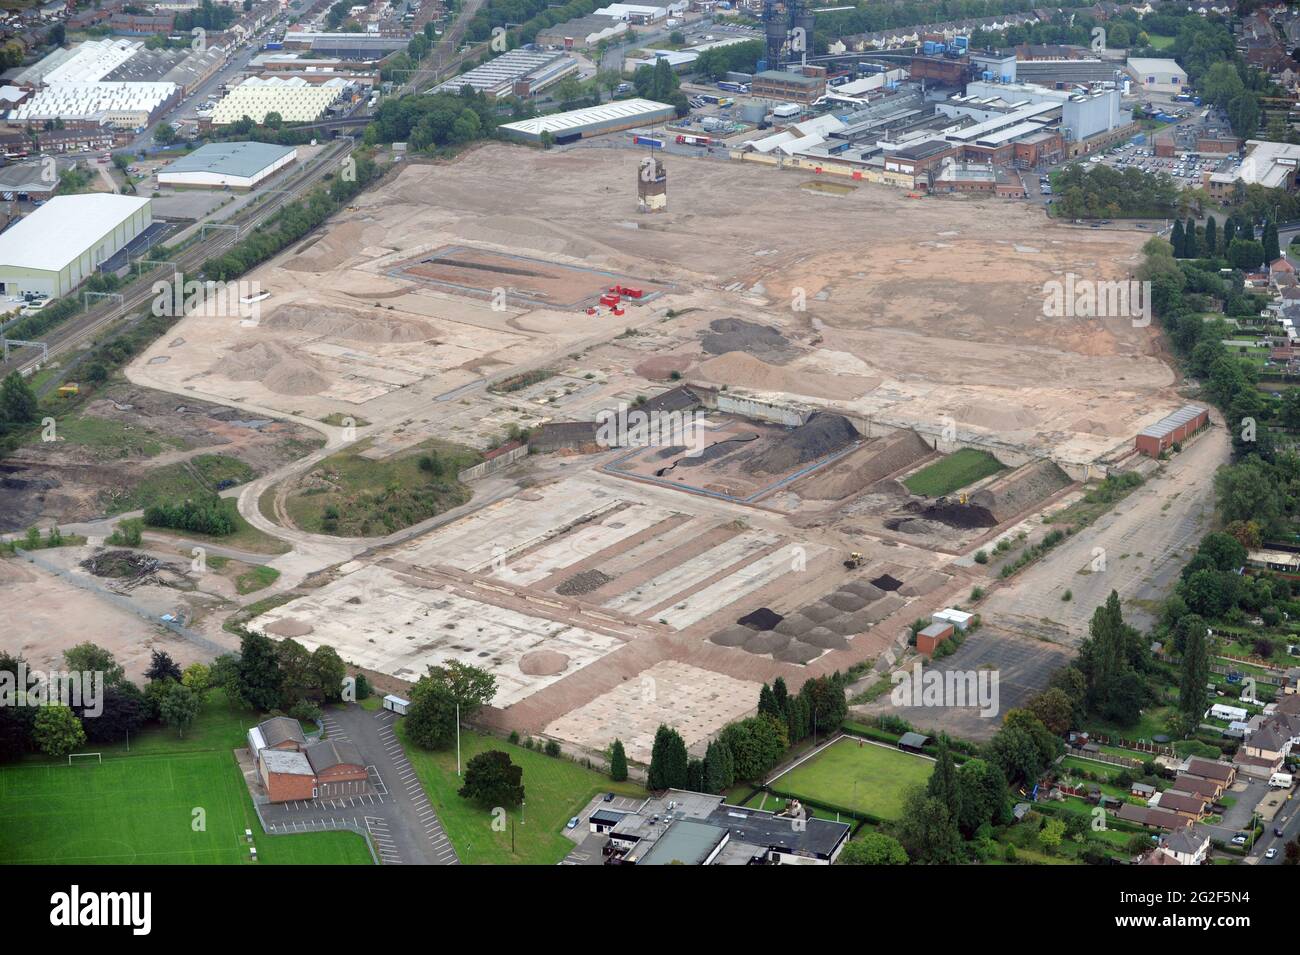 Aerial view of a Brownfield site ready for construction work Wolverhampton West Midlands Uk Stock Photo